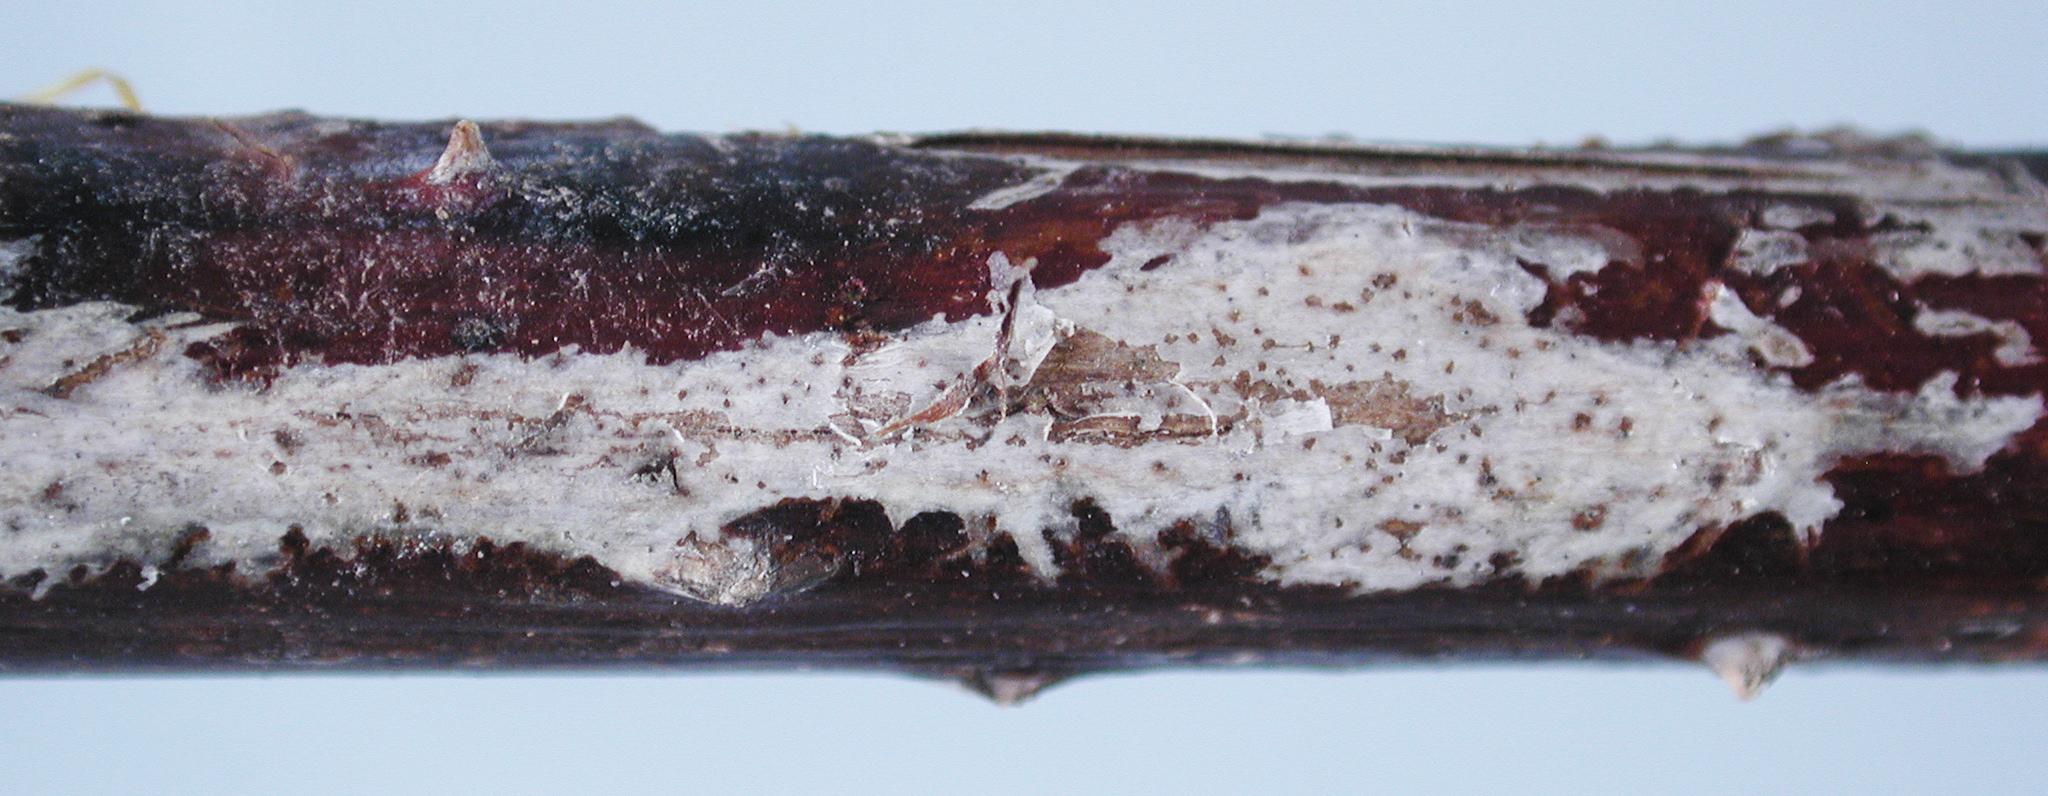 Close-up of lesion with fungal fruiting bodies evident as black specks. 